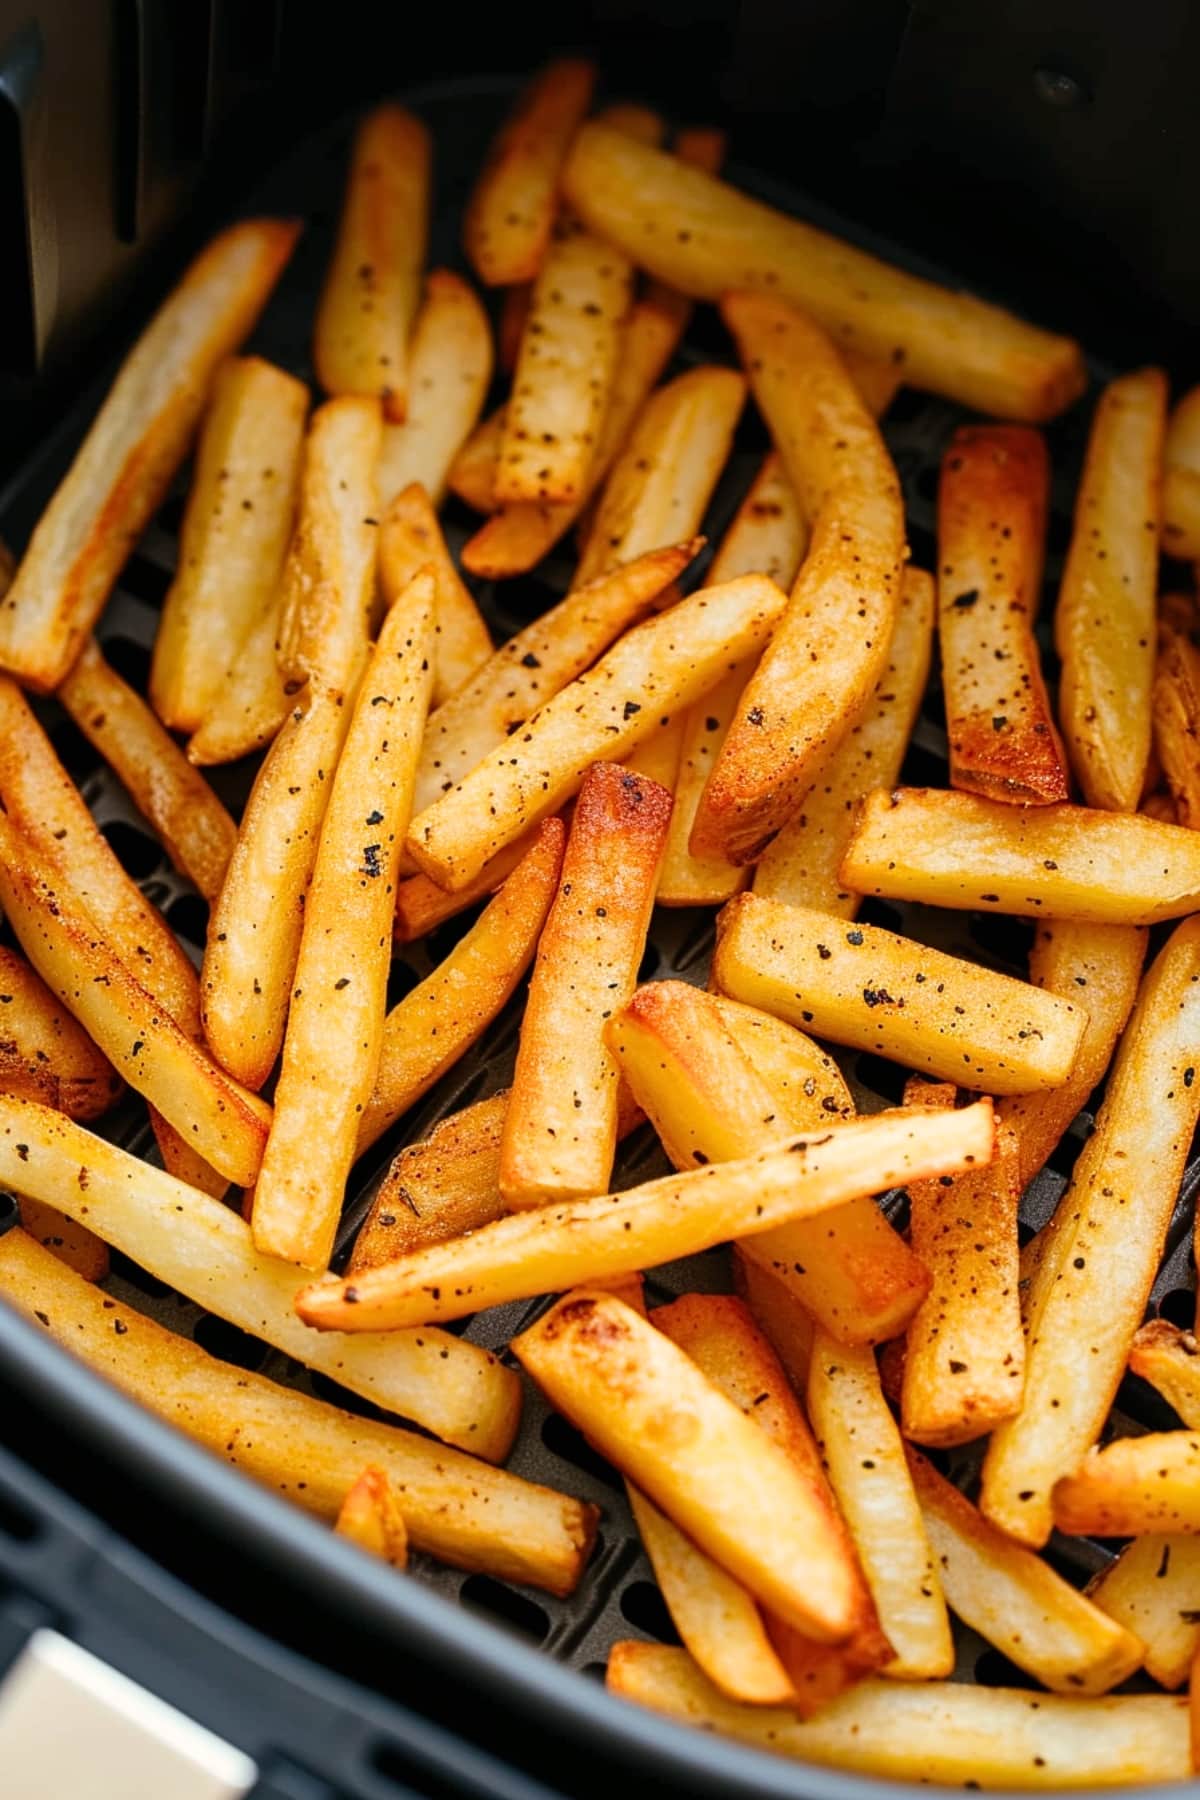 French fries in an air fryer basket.